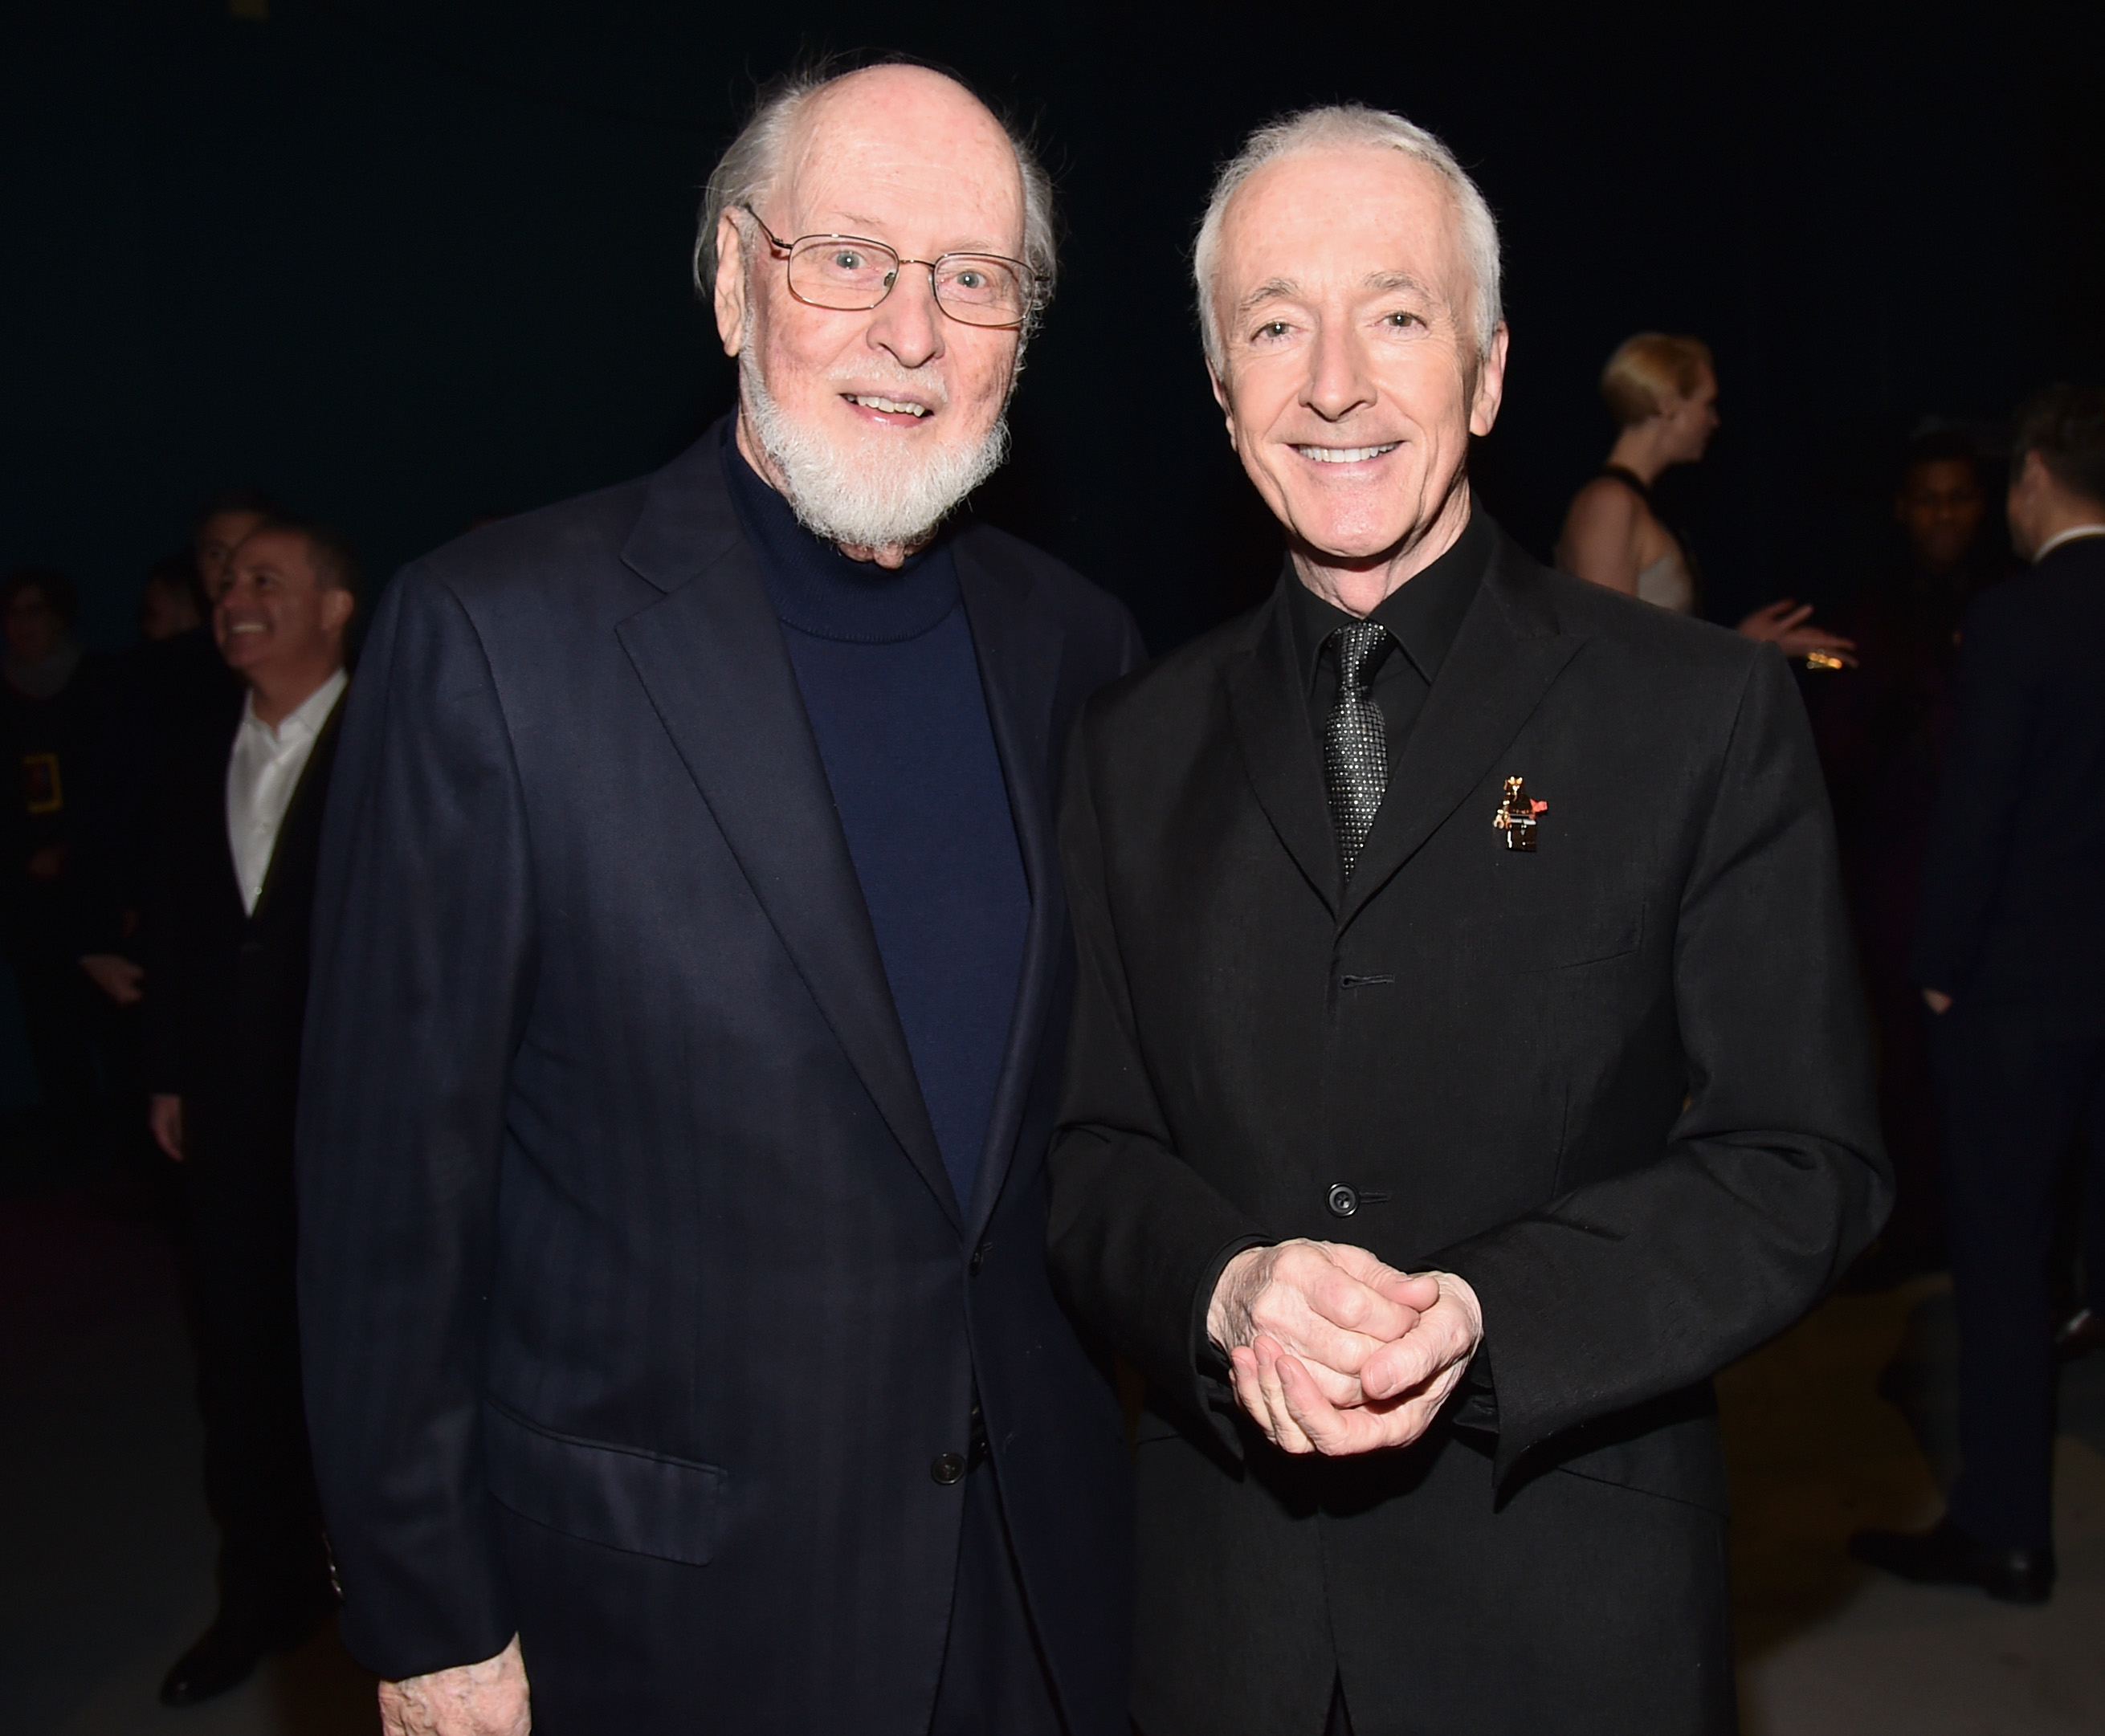 HOLLYWOOD, CA - DECEMBER 14: Composer John Williams (L) and actor Anthony Daniels attend the World Premiere of ?Star Wars: The Force Awakens? at the Dolby, El Capitan, and TCL Theatres on December 14, 2015 in Hollywood, California. Alberto E. Rodriguez/Getty Images for Disney/AFP